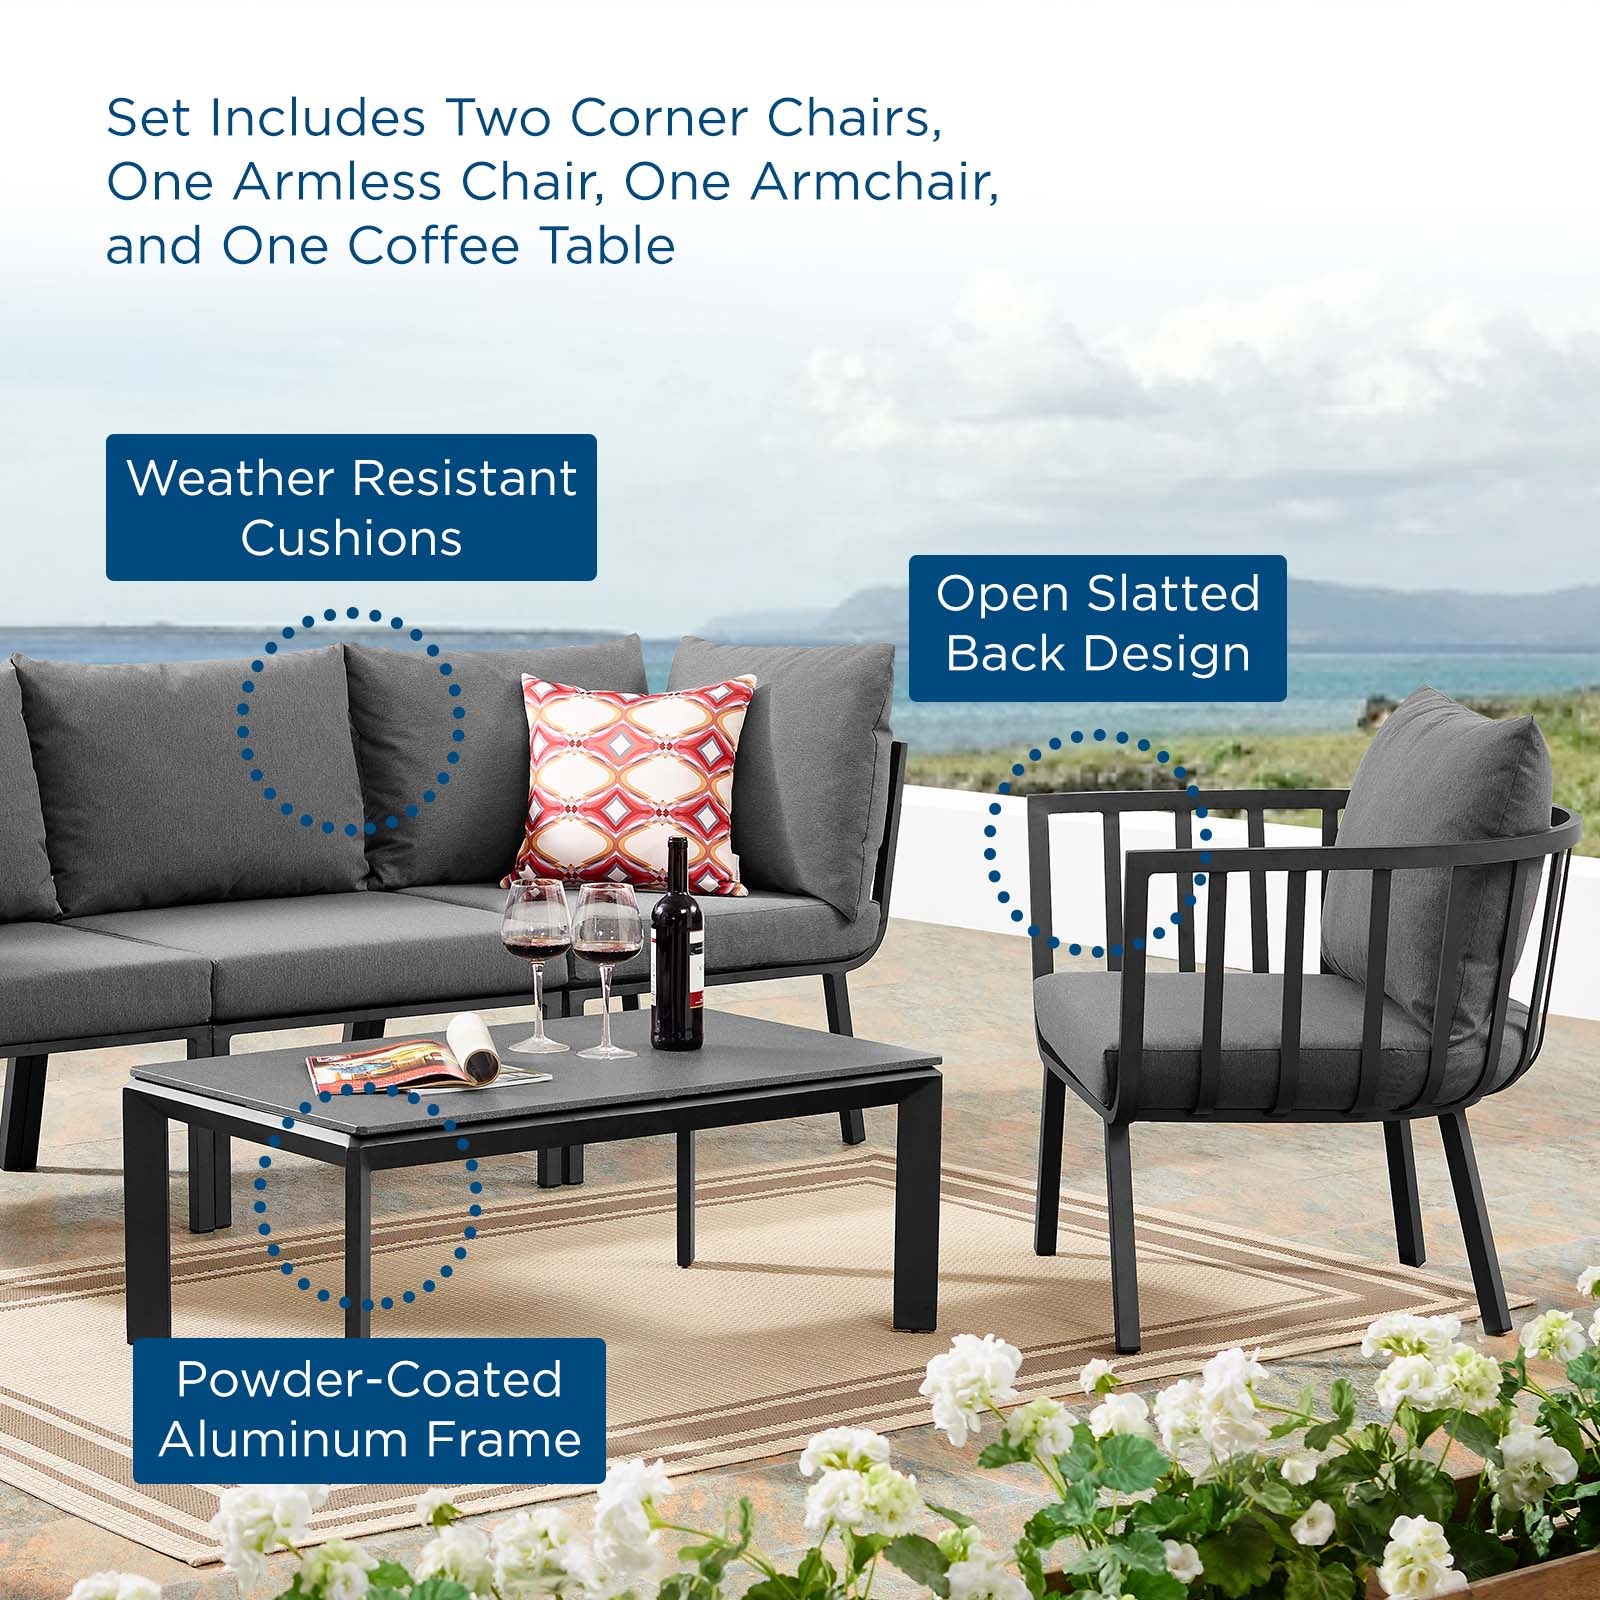 Modway Outdoor Conversation Sets - Riverside 5 Piece Outdoor Patio Set Gray Charcoal